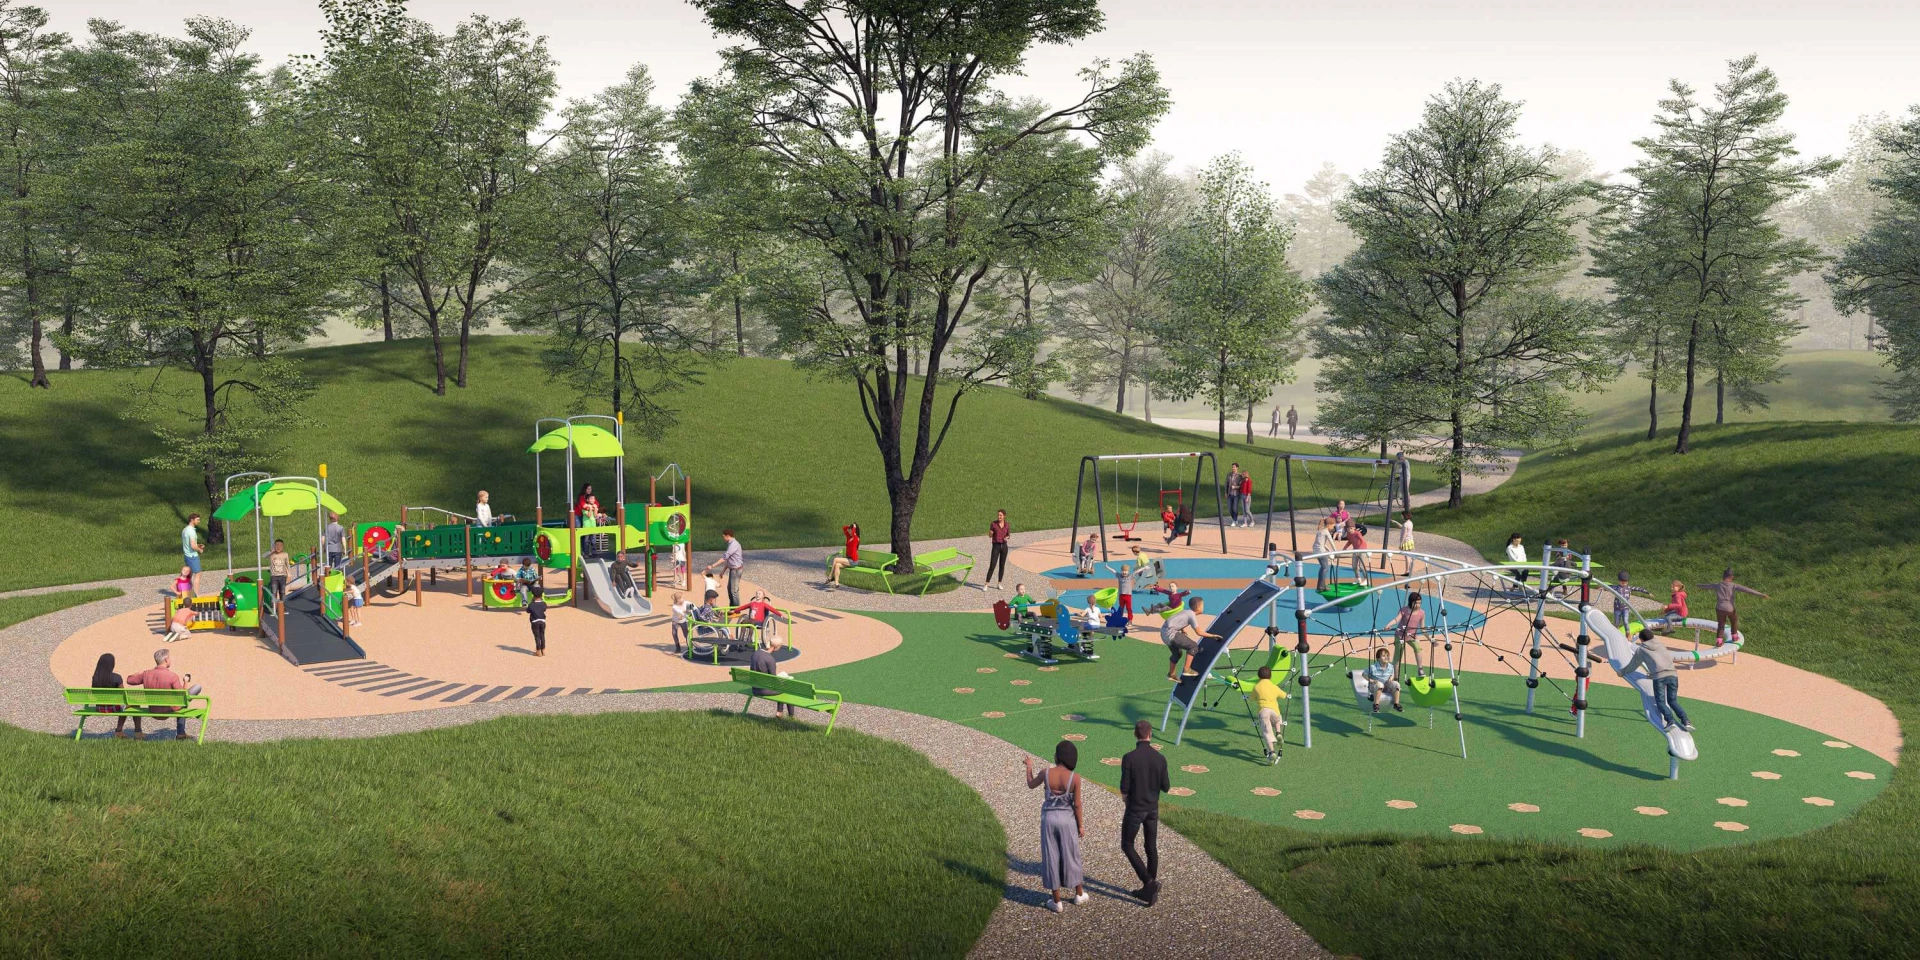 Design idea for designing an inclusive playground in a park